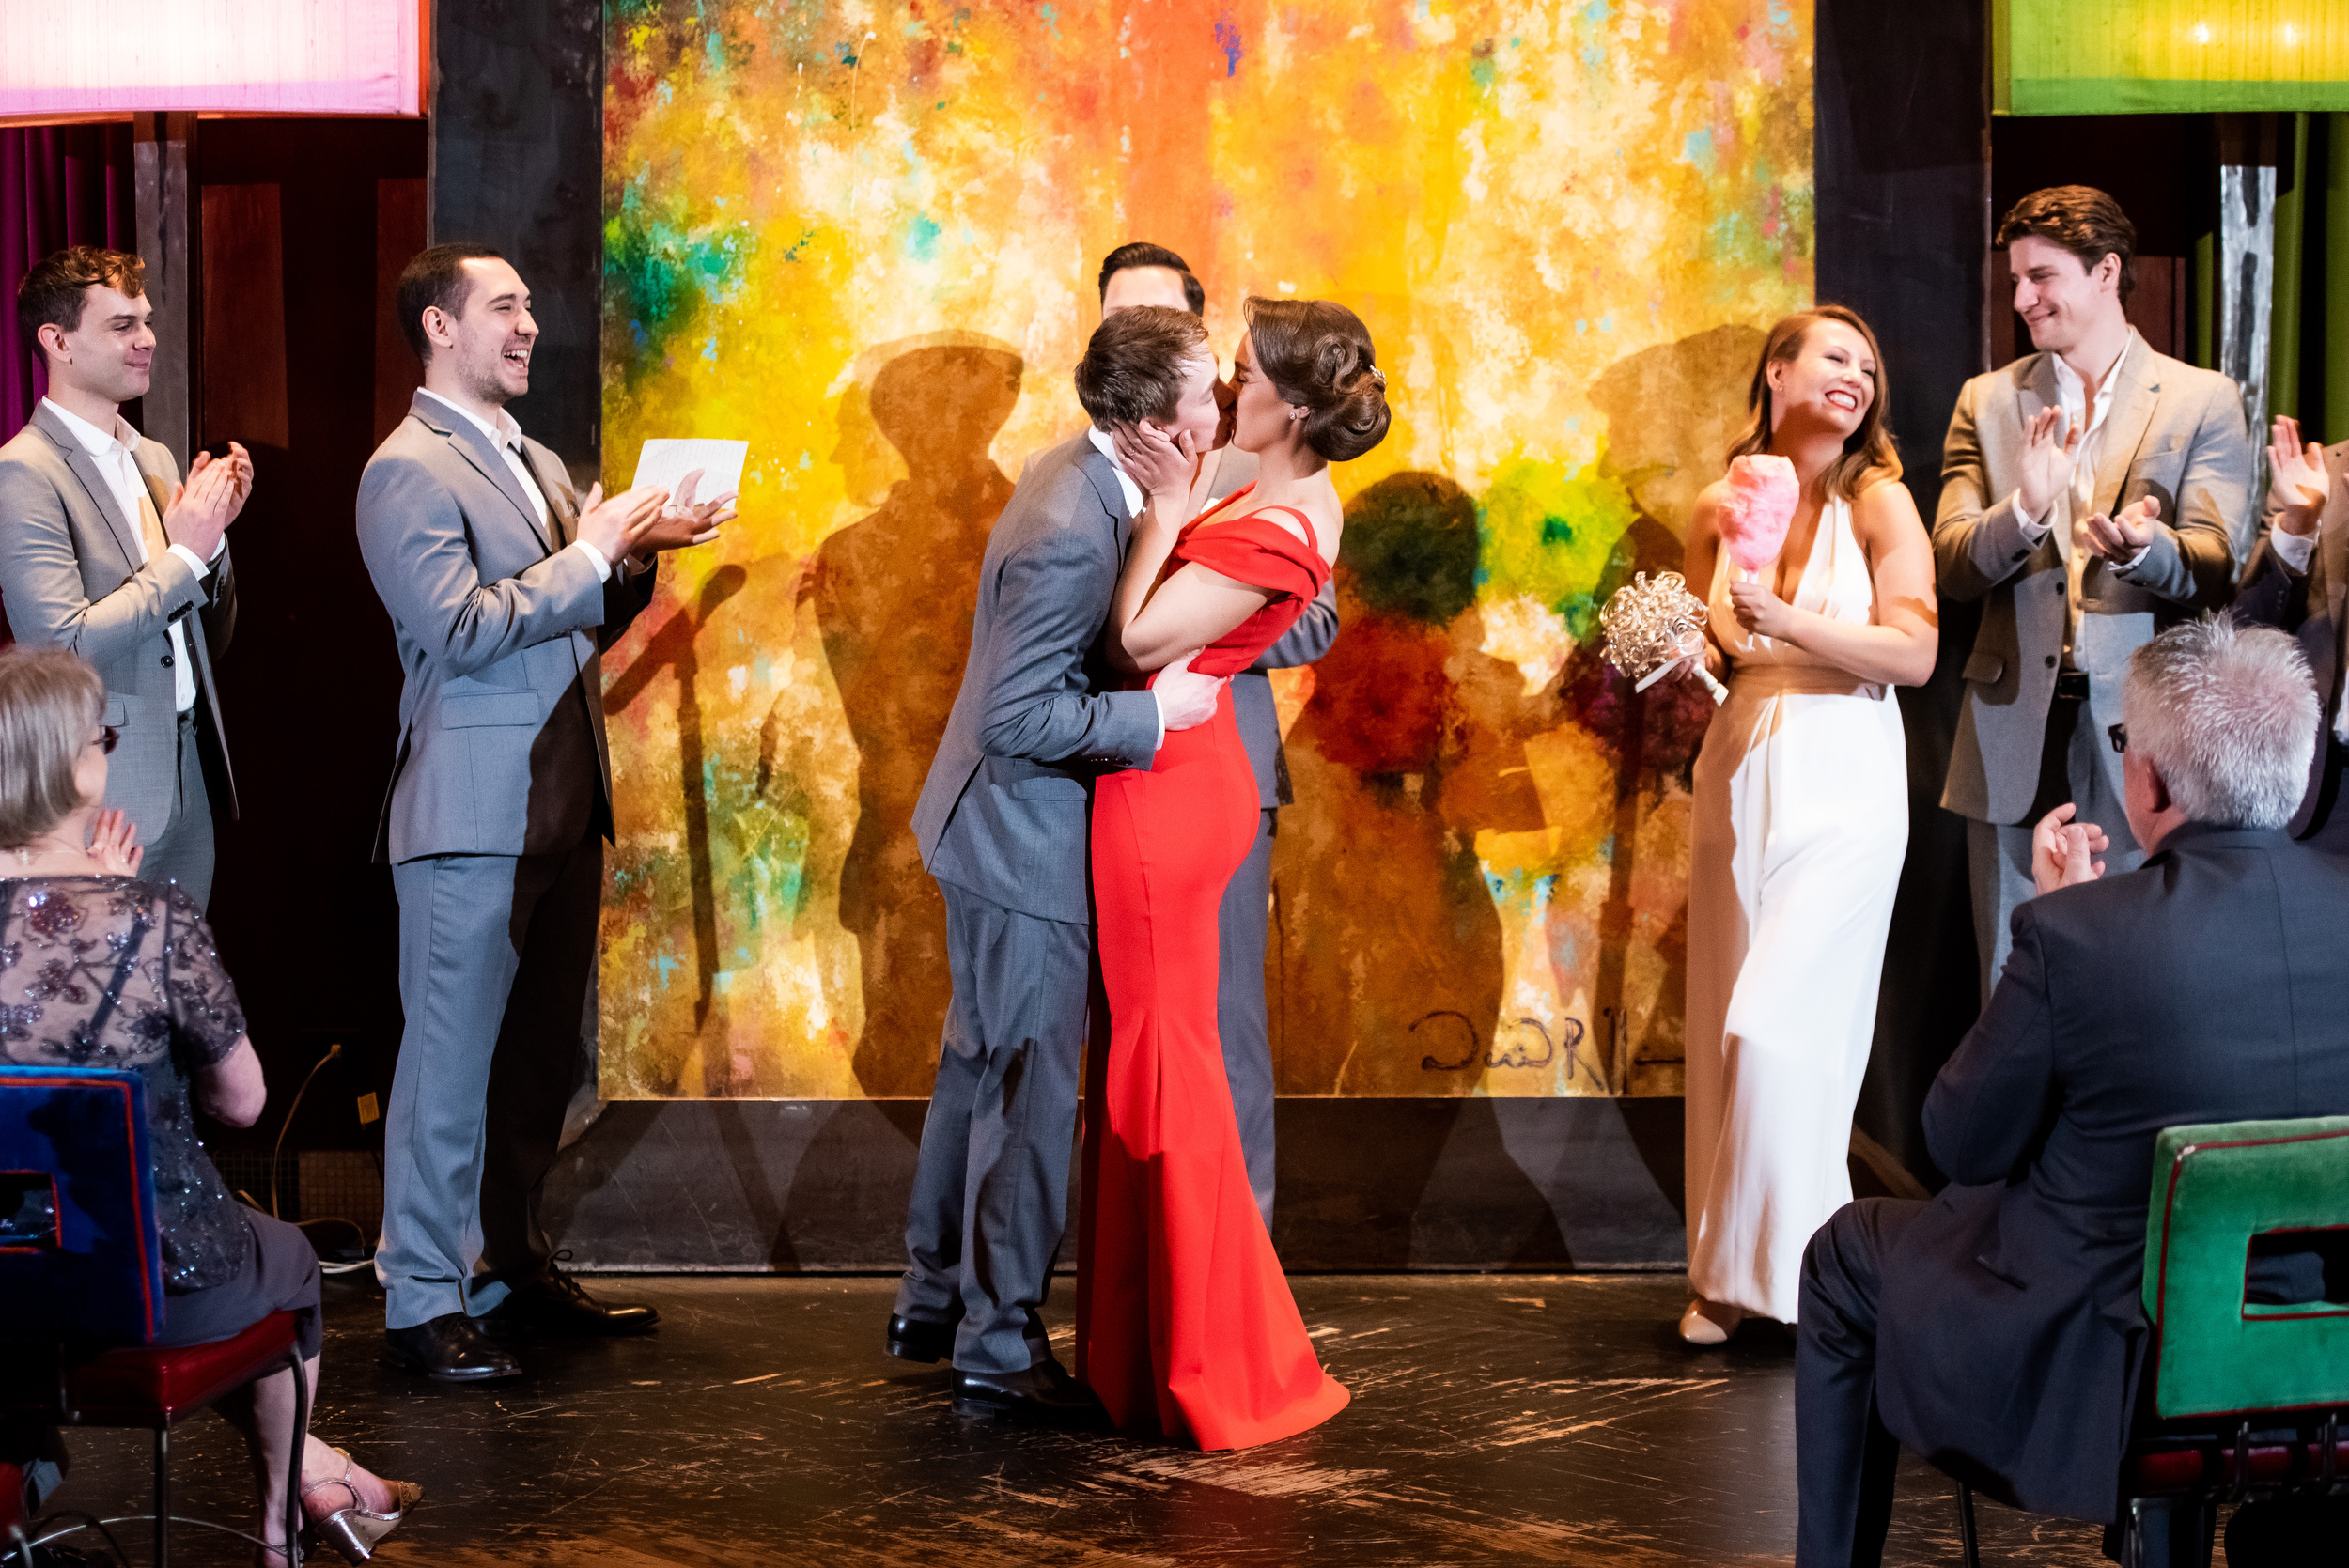 Colorful wedding ceremony venue: Carnivale Chicago wedding captured by J Brown Photography